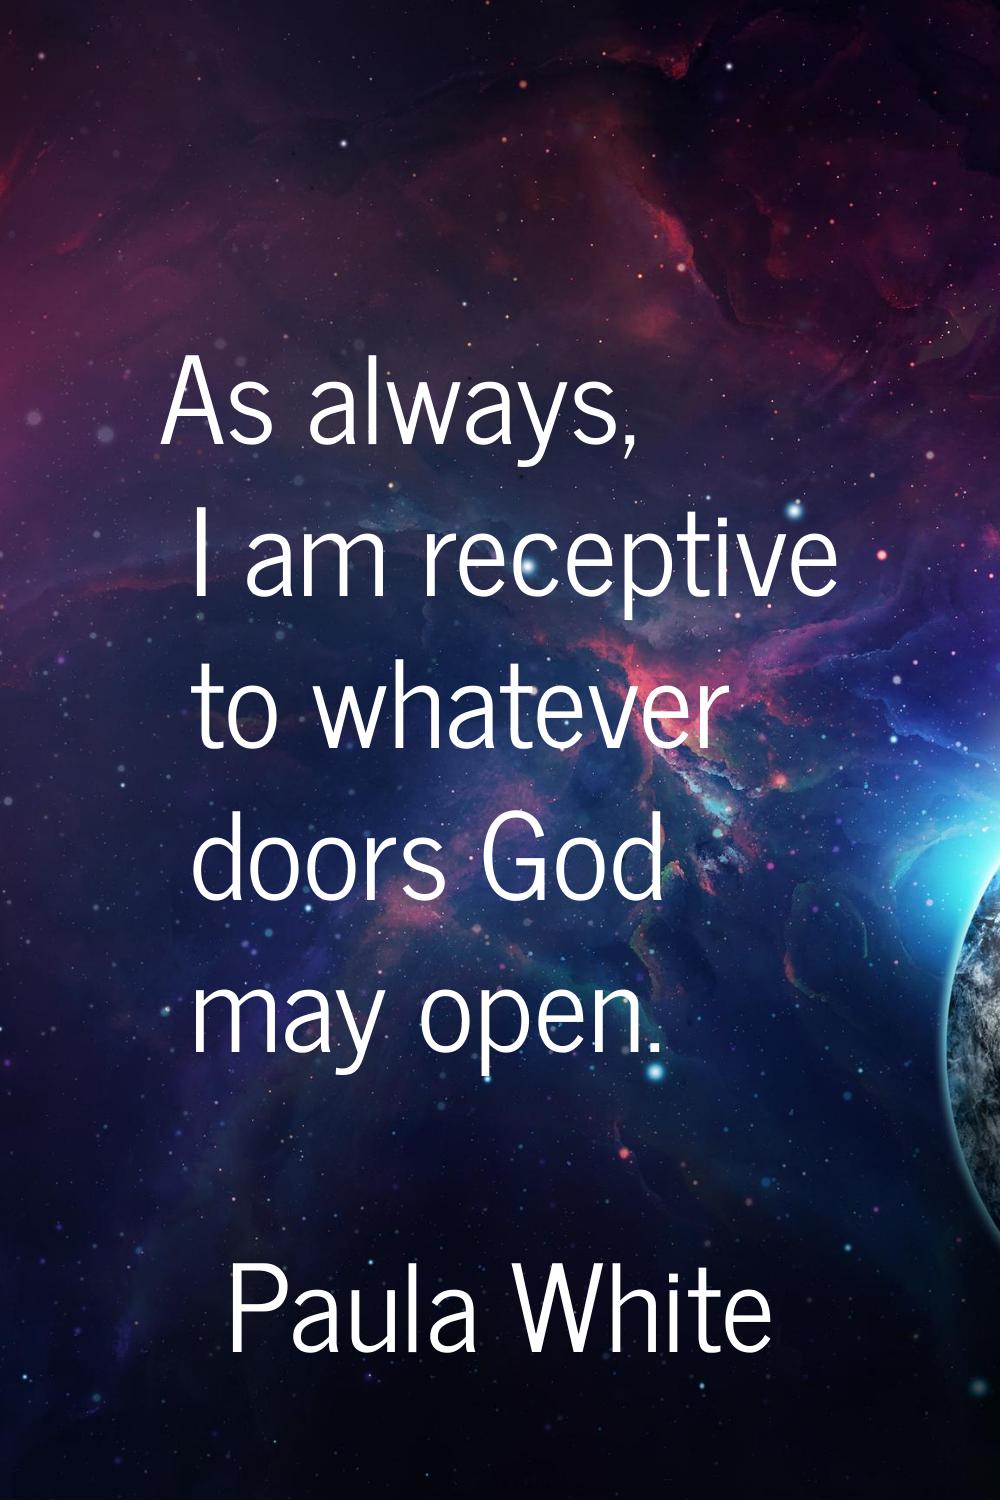 As always, I am receptive to whatever doors God may open.